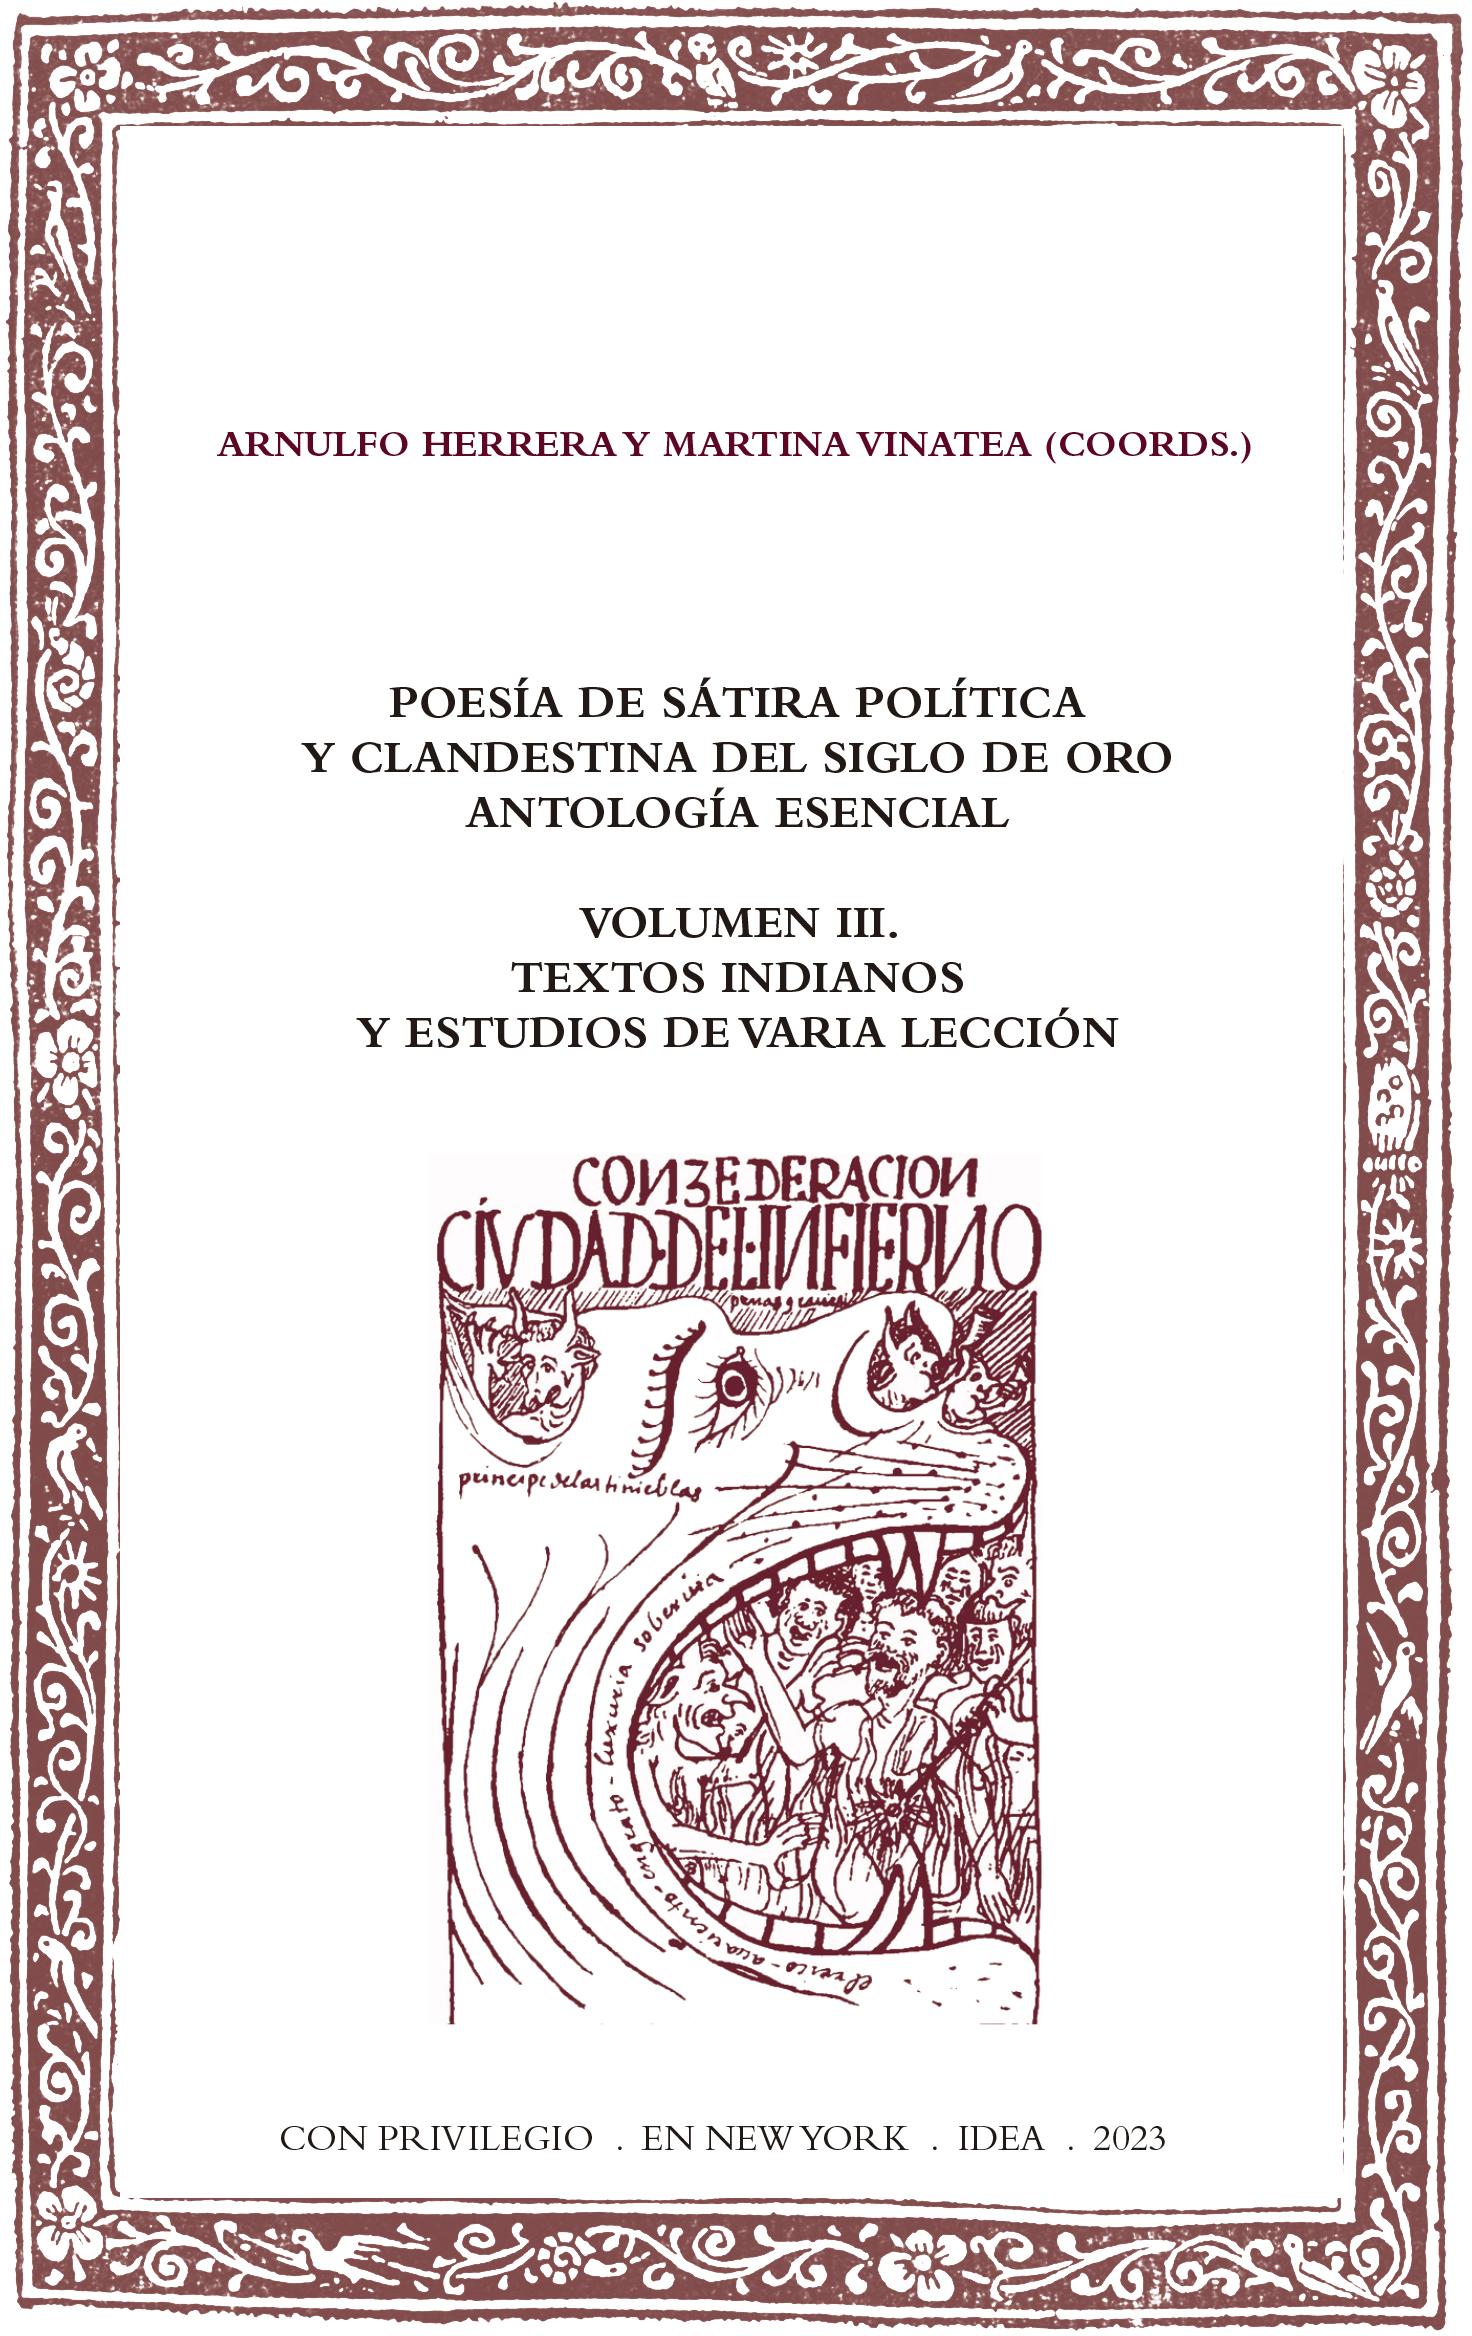 Poetry of political and clandestine satire in the Golden Age. Essential anthology. Volume III. Indian texts and programs of study of various lessons.